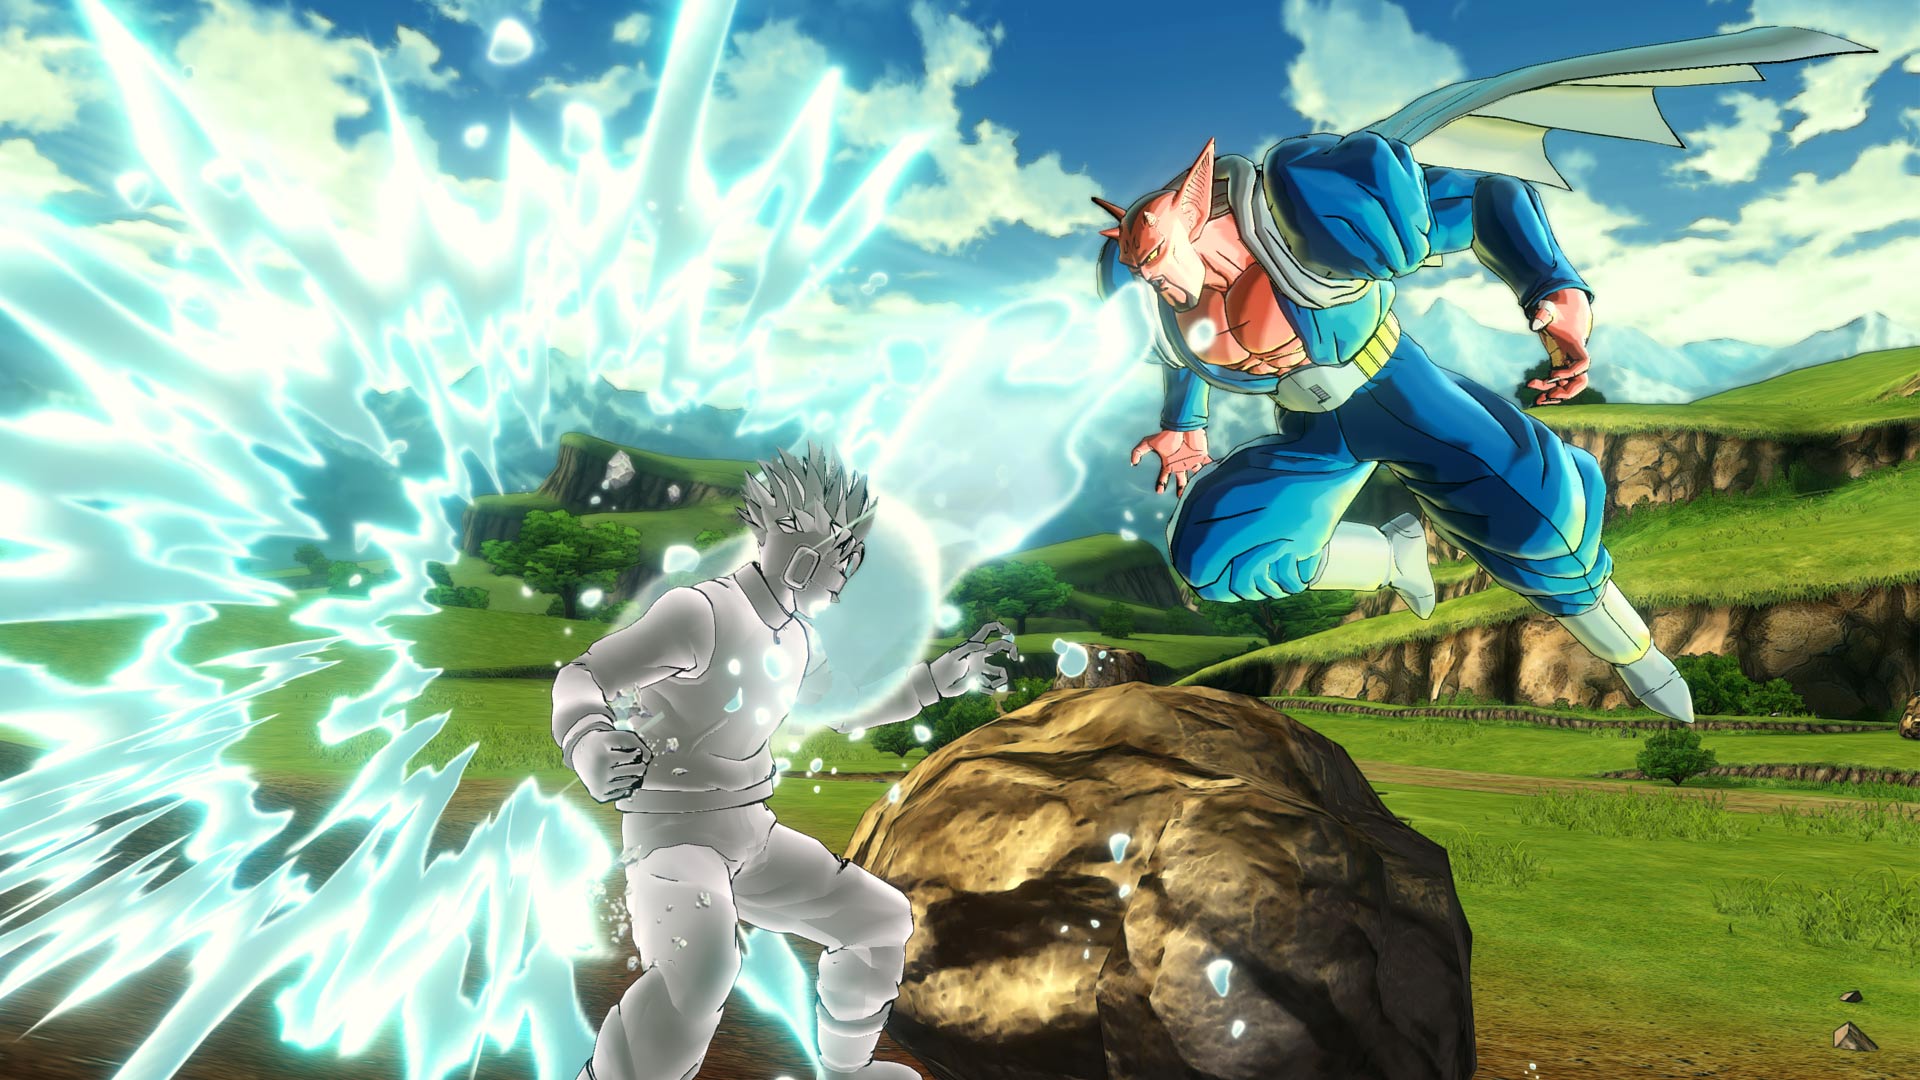 Dragon Ball Xenoverse 2 - Extra Pack 2 DLC footage